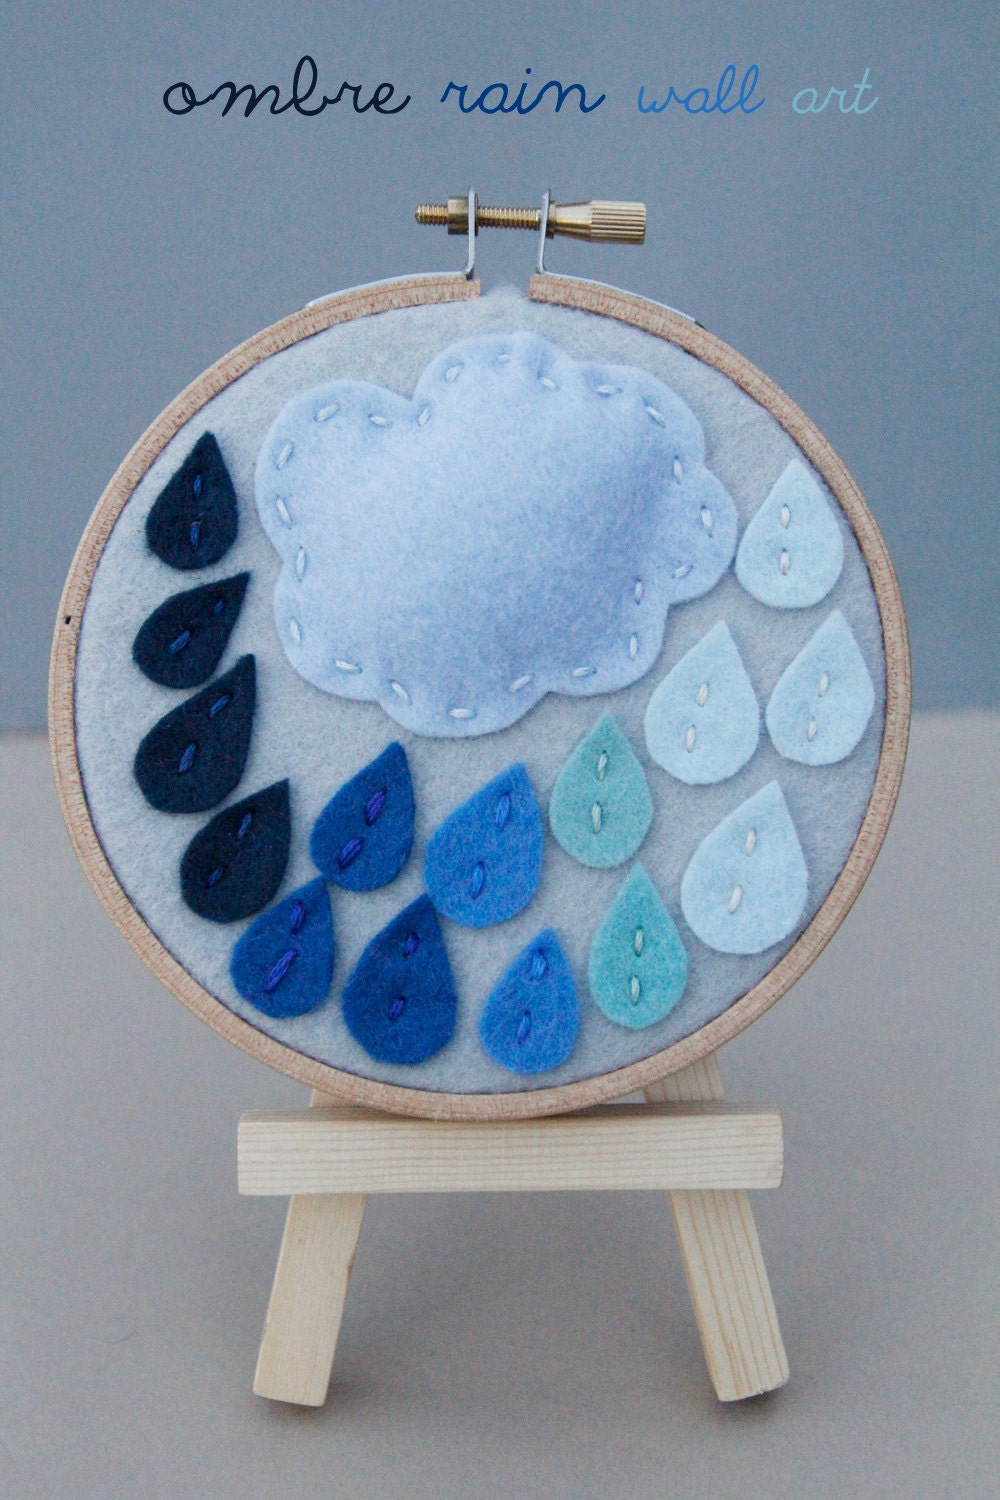 Blue Ombre Rain Drops and Puffy Cloud Wall Art Embroidery Hoop by Catshy Crafts - CatshyCrafts